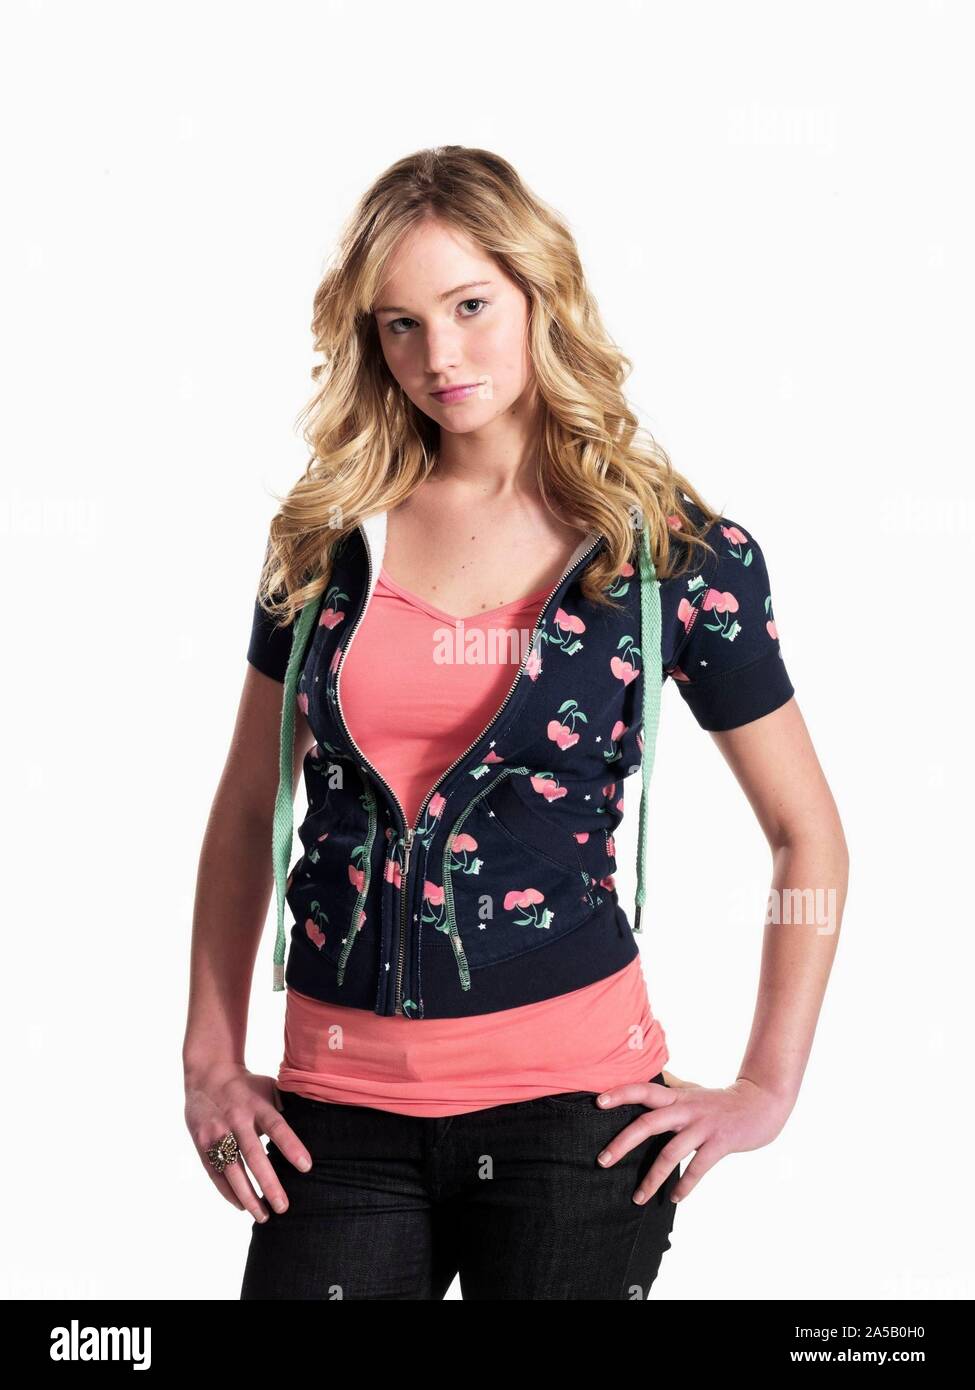 JENNIFER LAWRENCE in THE BILL ENGVALL SHOW (2007) -Original title: BILL ENGVALL SHOW, THE-TV-, directed by JAMES WIDDOES. Credit: VERY FUNNY PRODUCTIONS / Album Stock Photo